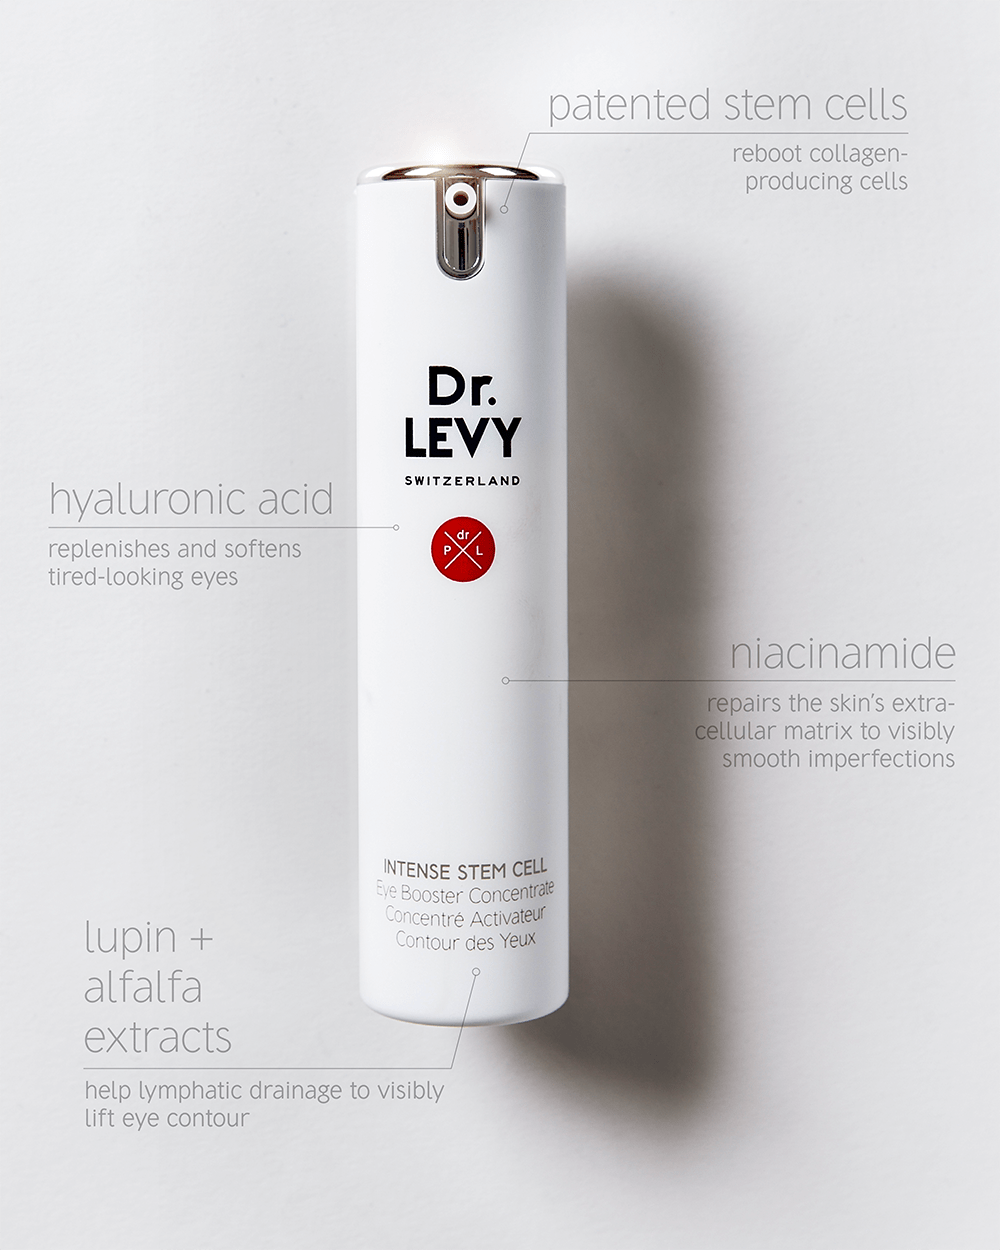 dr-levy-switzerland-skin-care-beauty-product-eye-booster-concentrate-skin-benefits.png